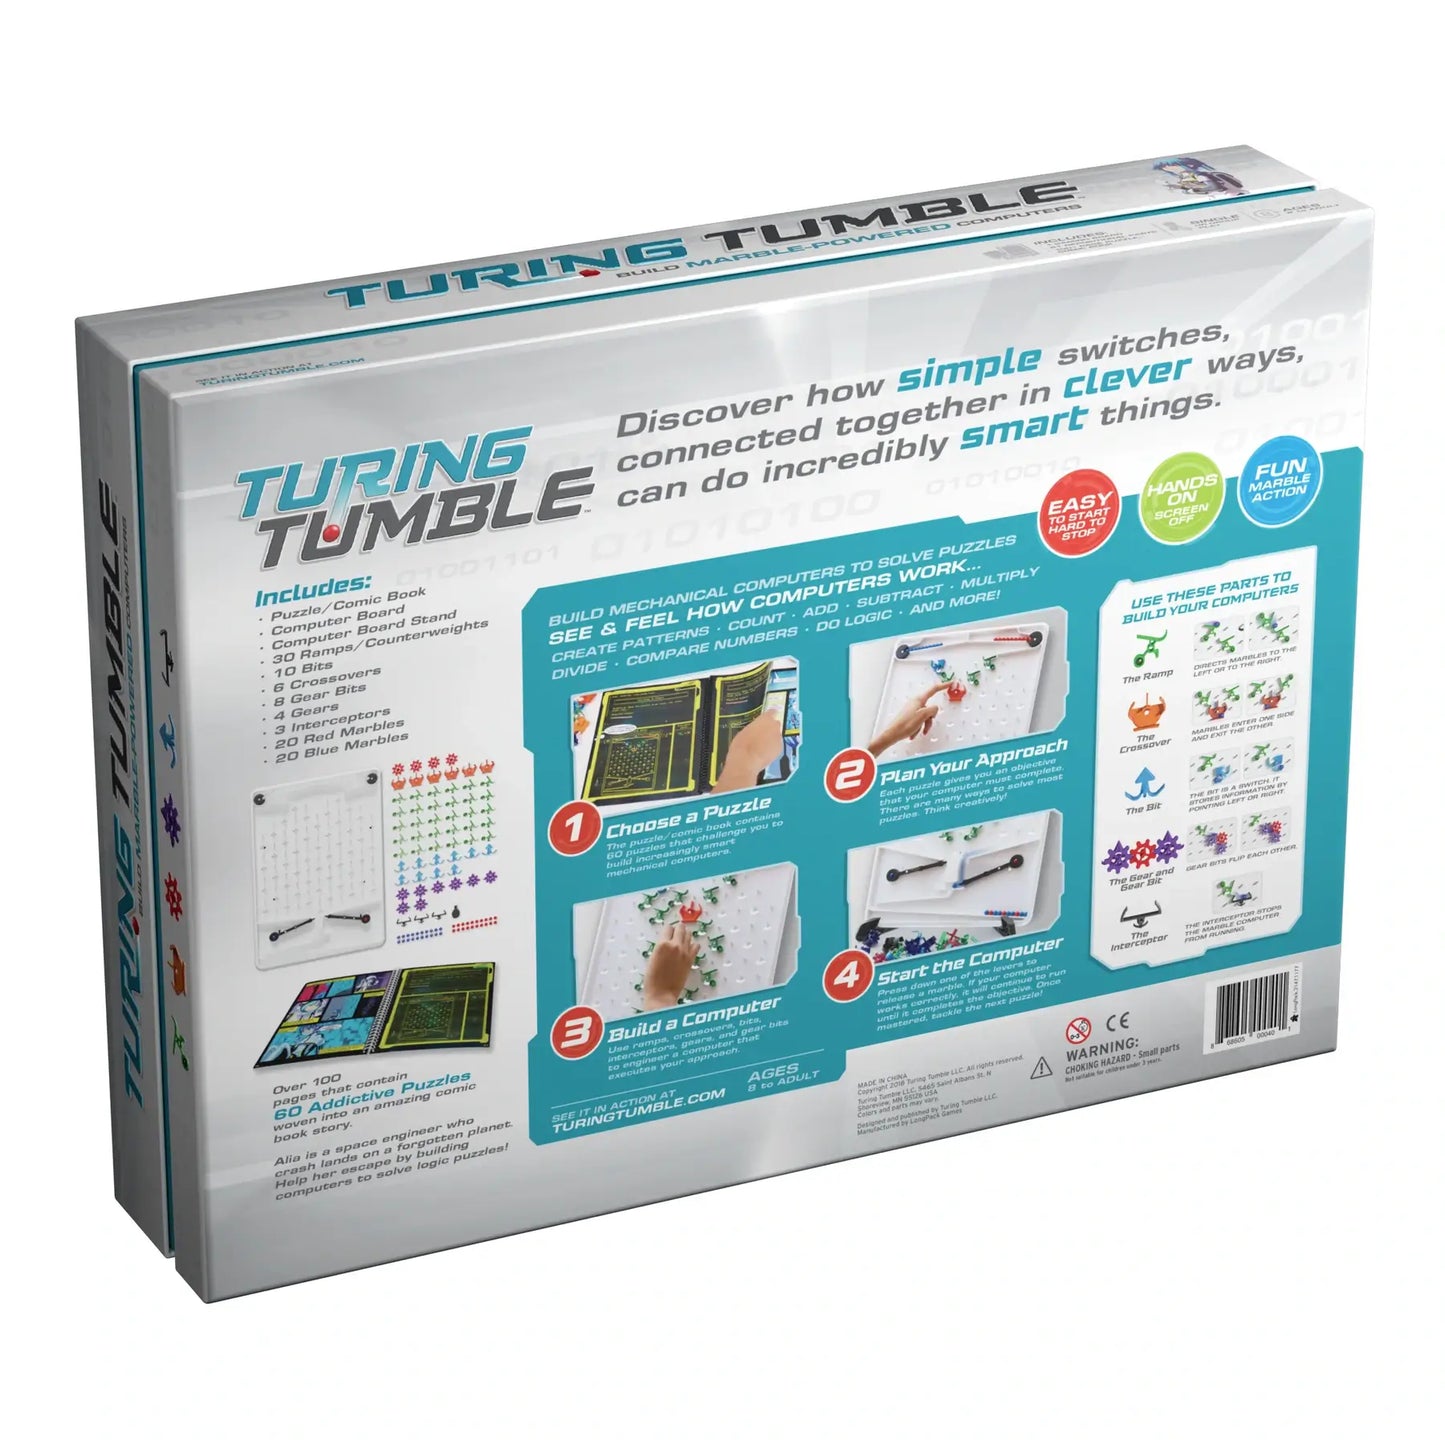 Turing Tumble Available for Purchase in Store